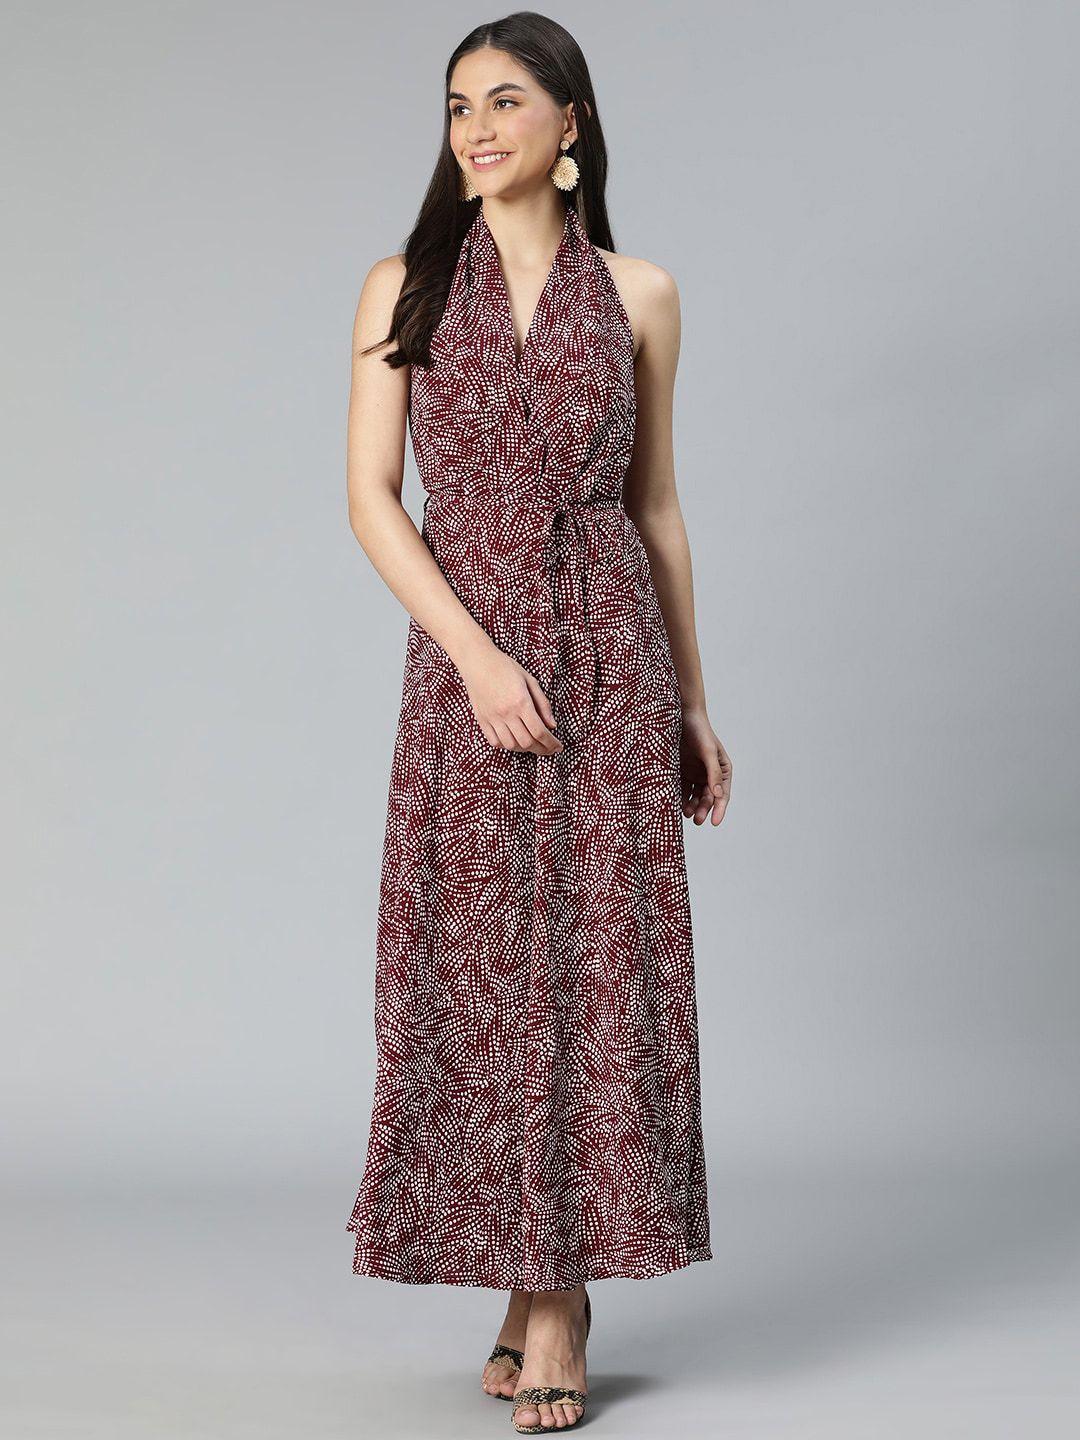 oxolloxo-maroon-floral-tie-up-neck-maxi-dress